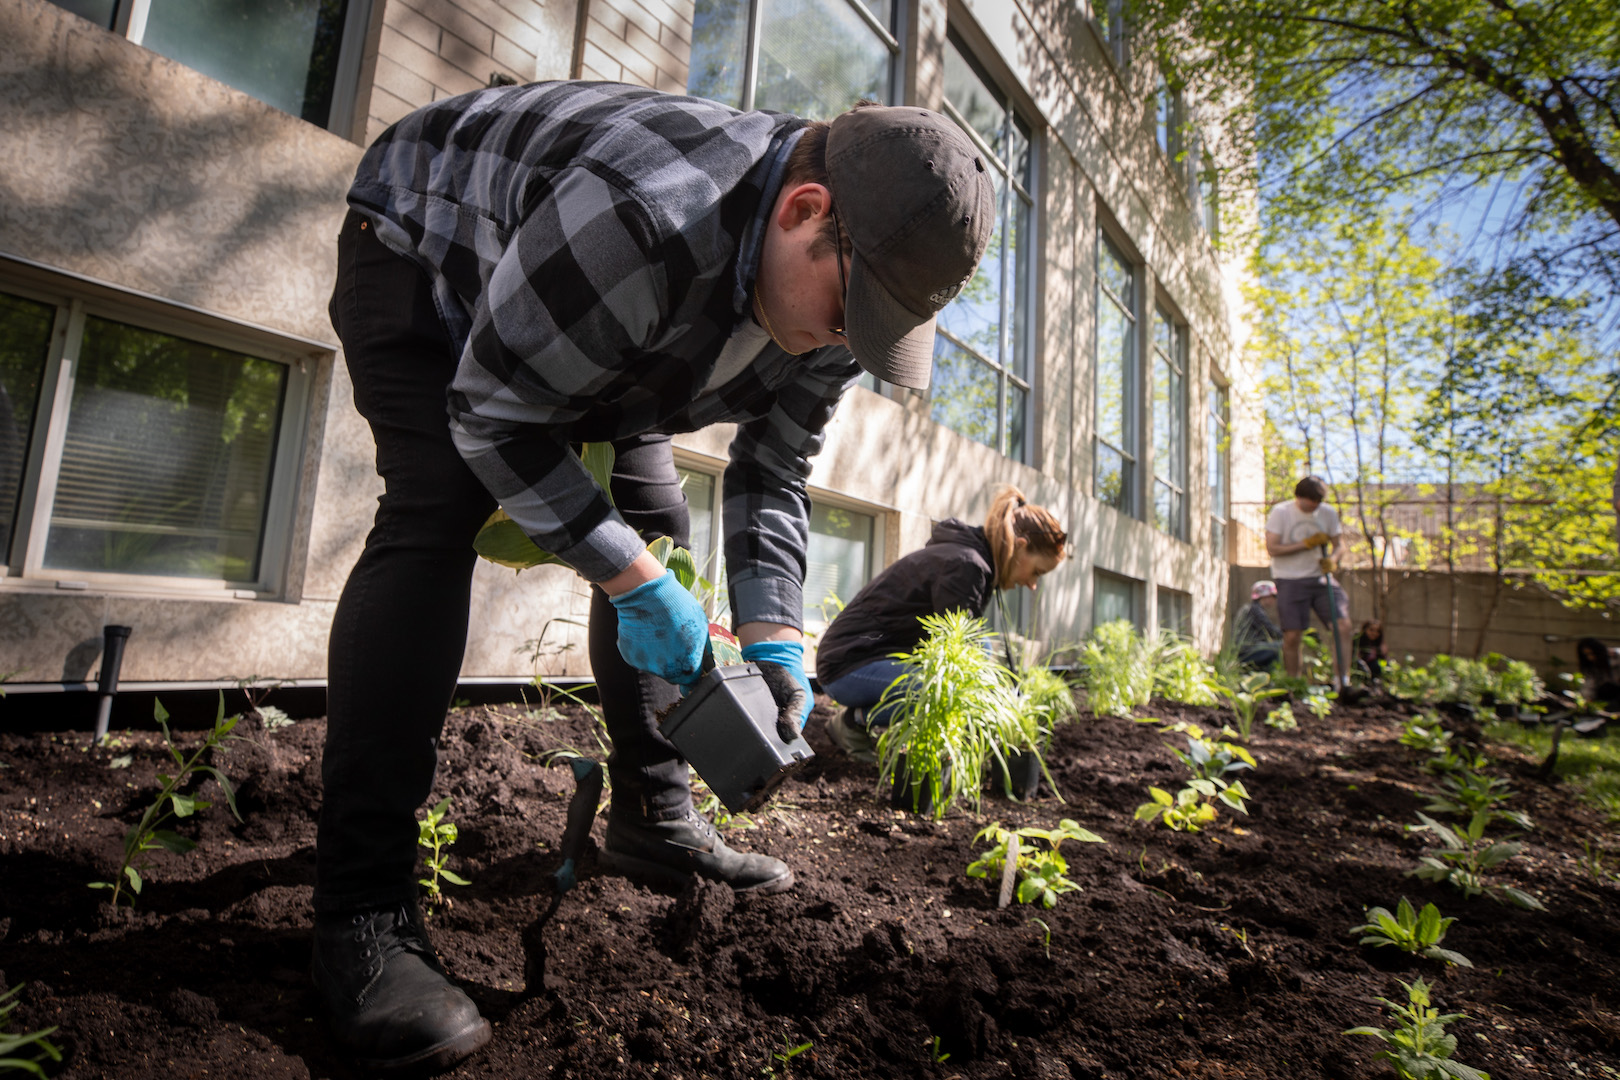 Person planting a green plant in university flower bed with others in the background.